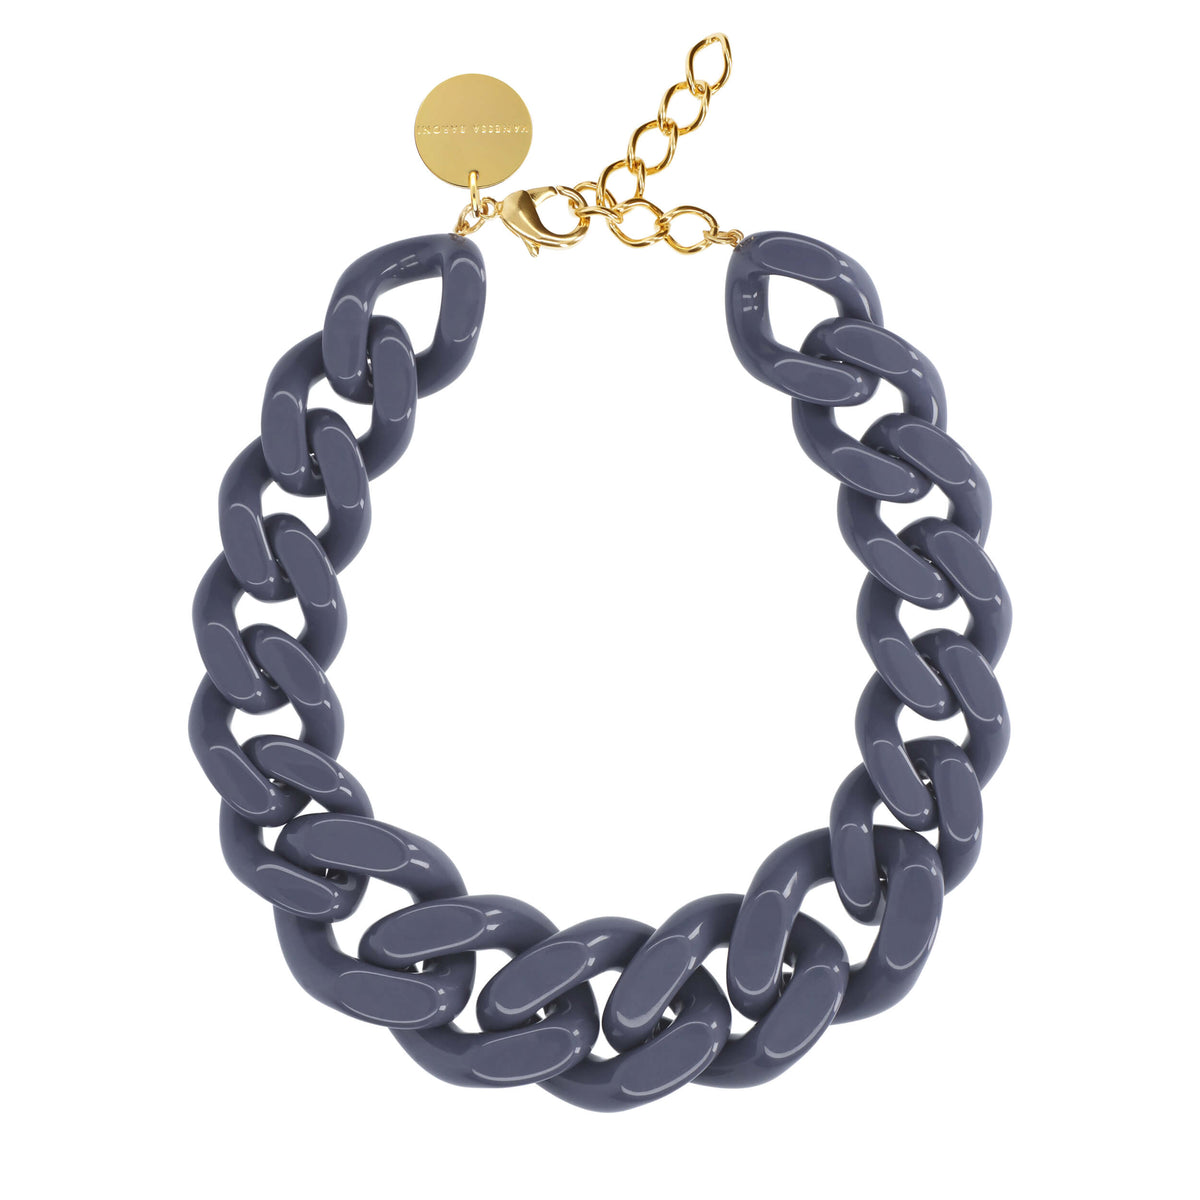 GREAT Necklace grey-blue